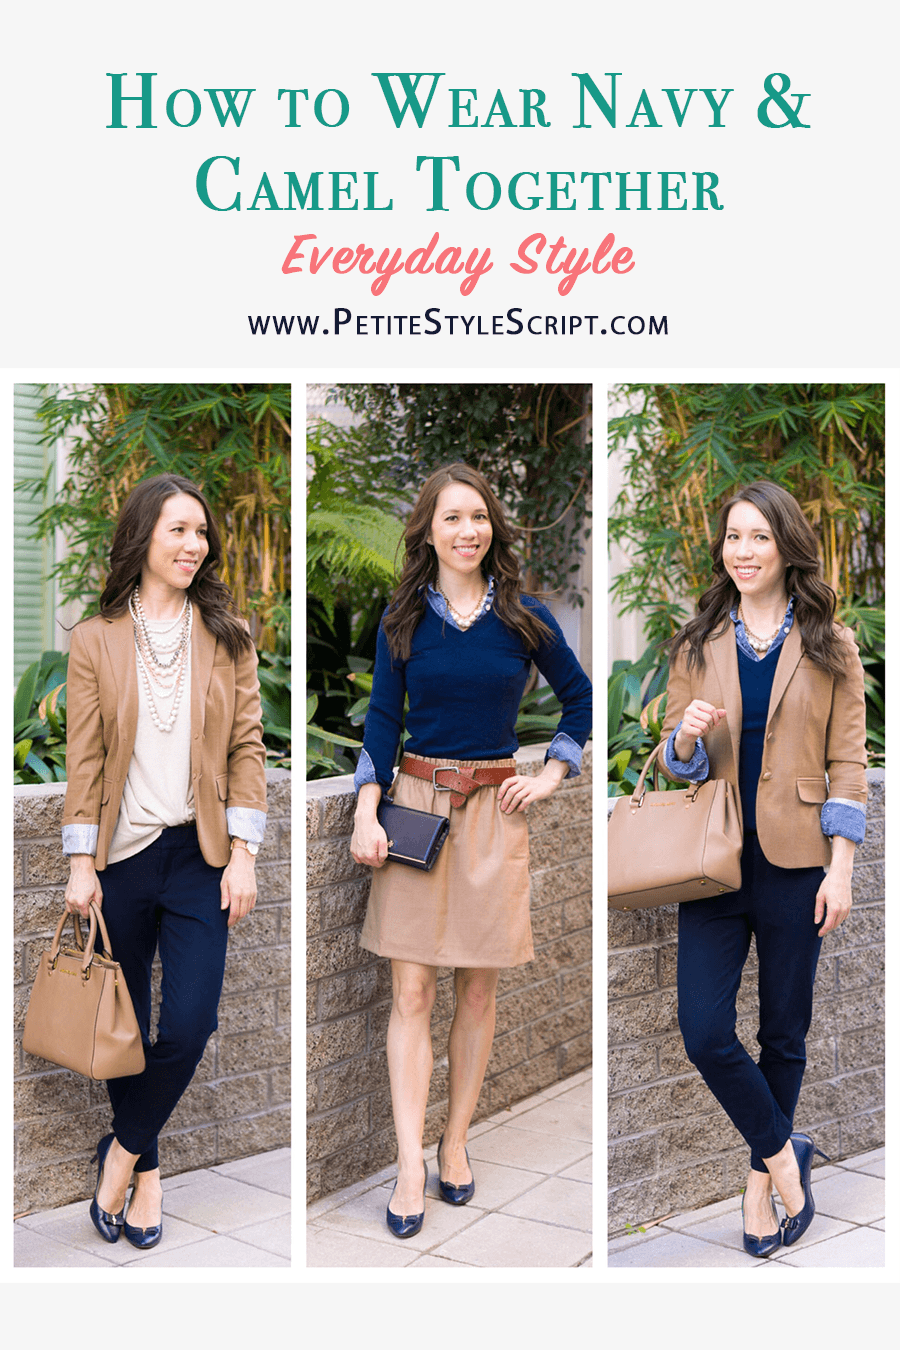 How to Wear Navy & Camel Together // Neutral Tones & Layering